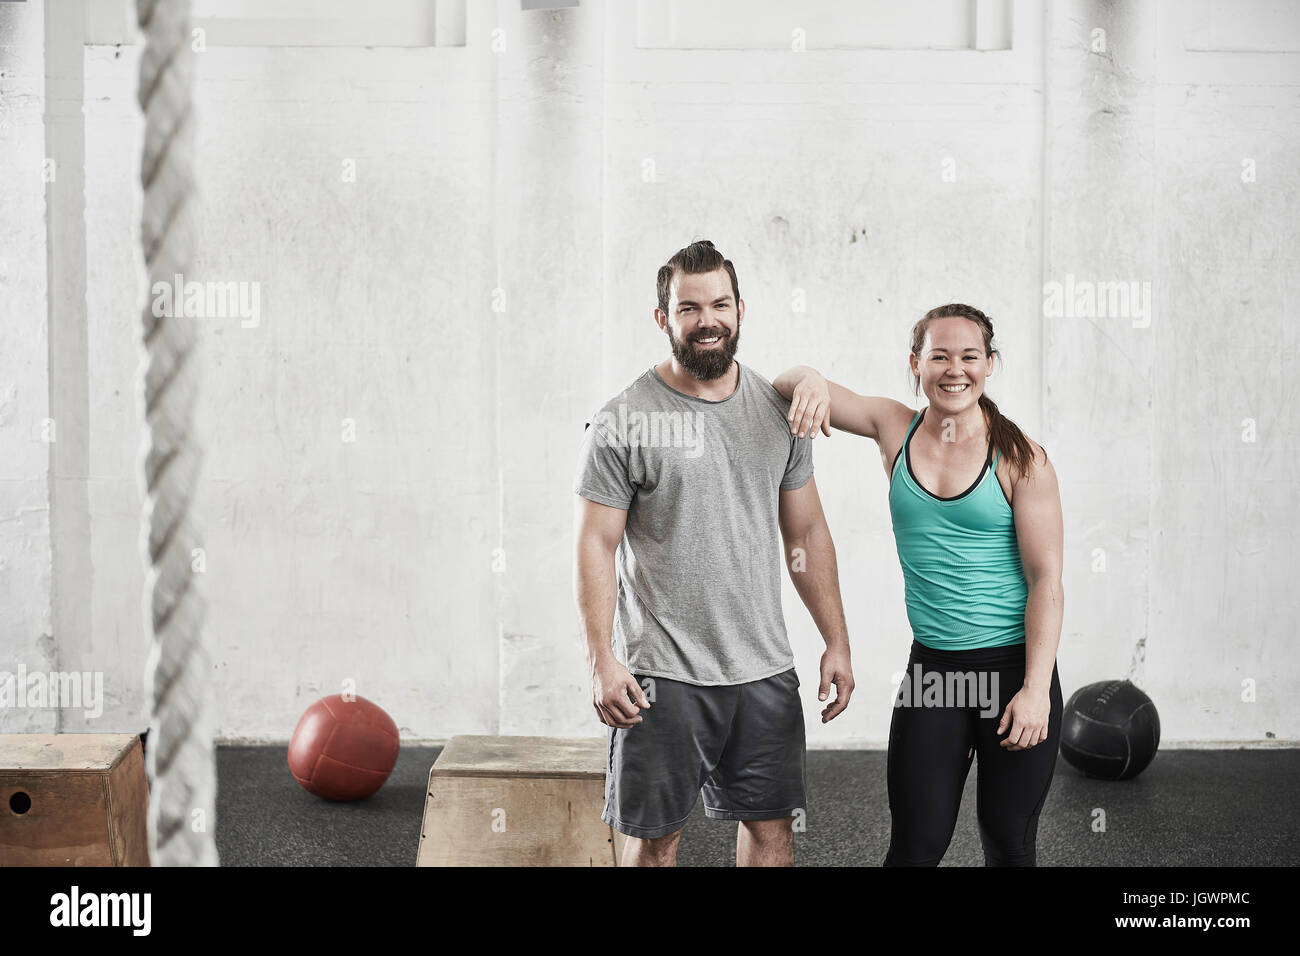 Couple in cross training gym Stock Photo